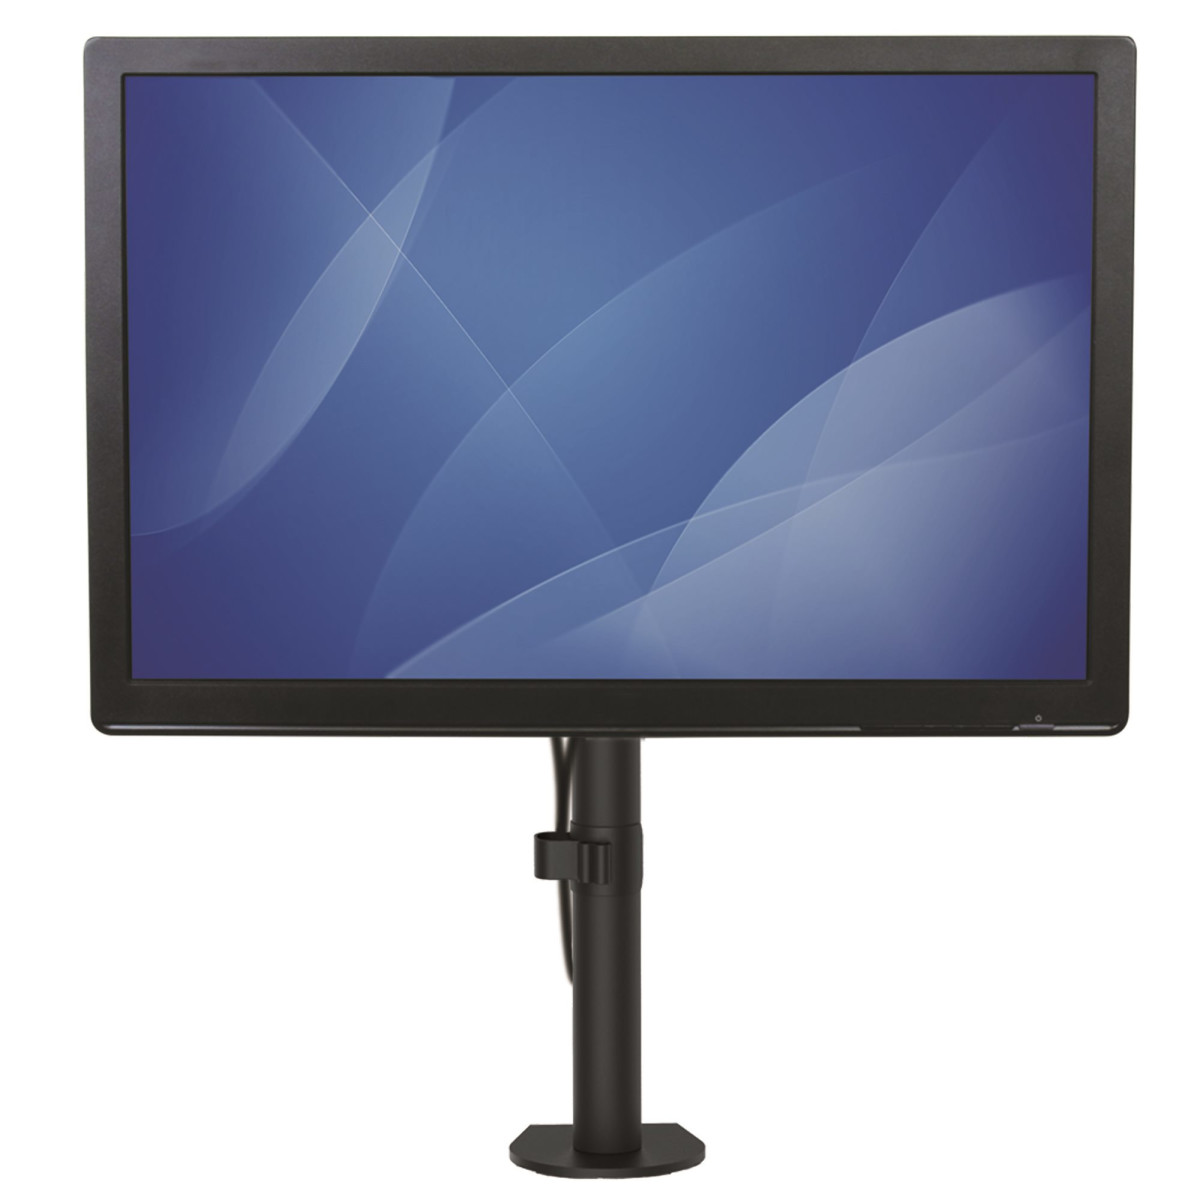 Monitor Mount - For up to 32